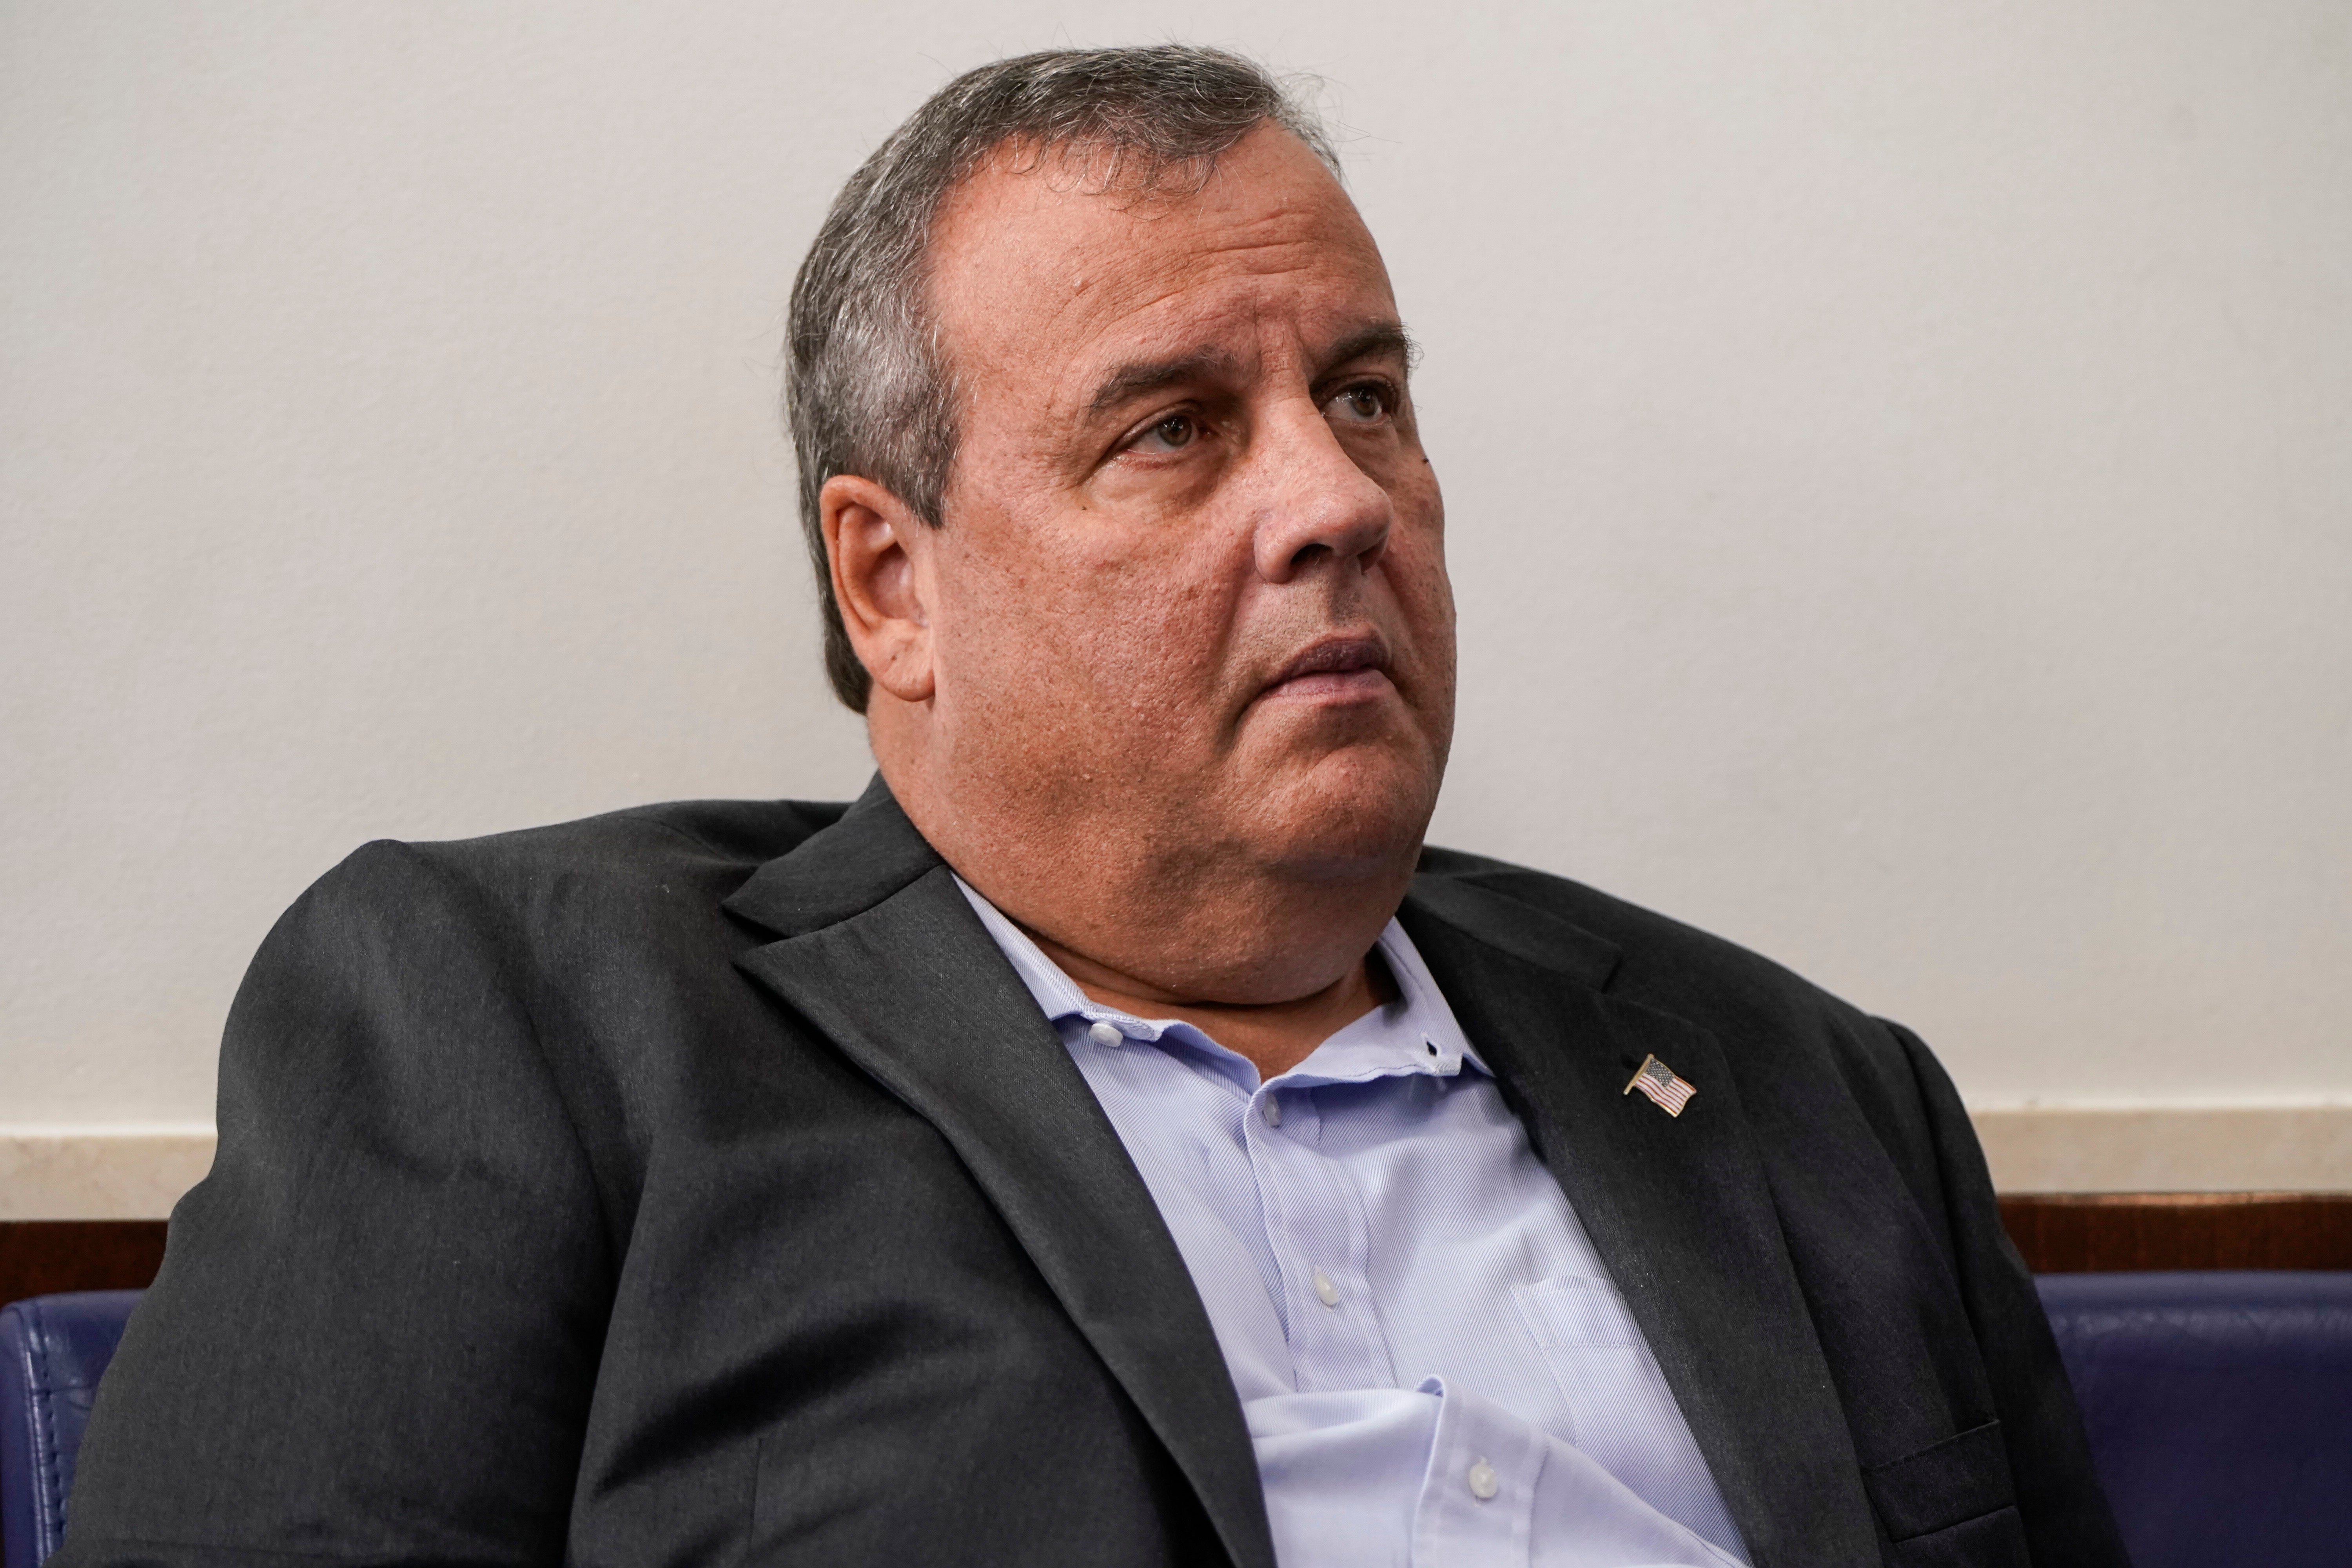 Former New Jersey Governor Chris Christie was among several within President Donald Trump's orbit who recently contracted Covid-19.